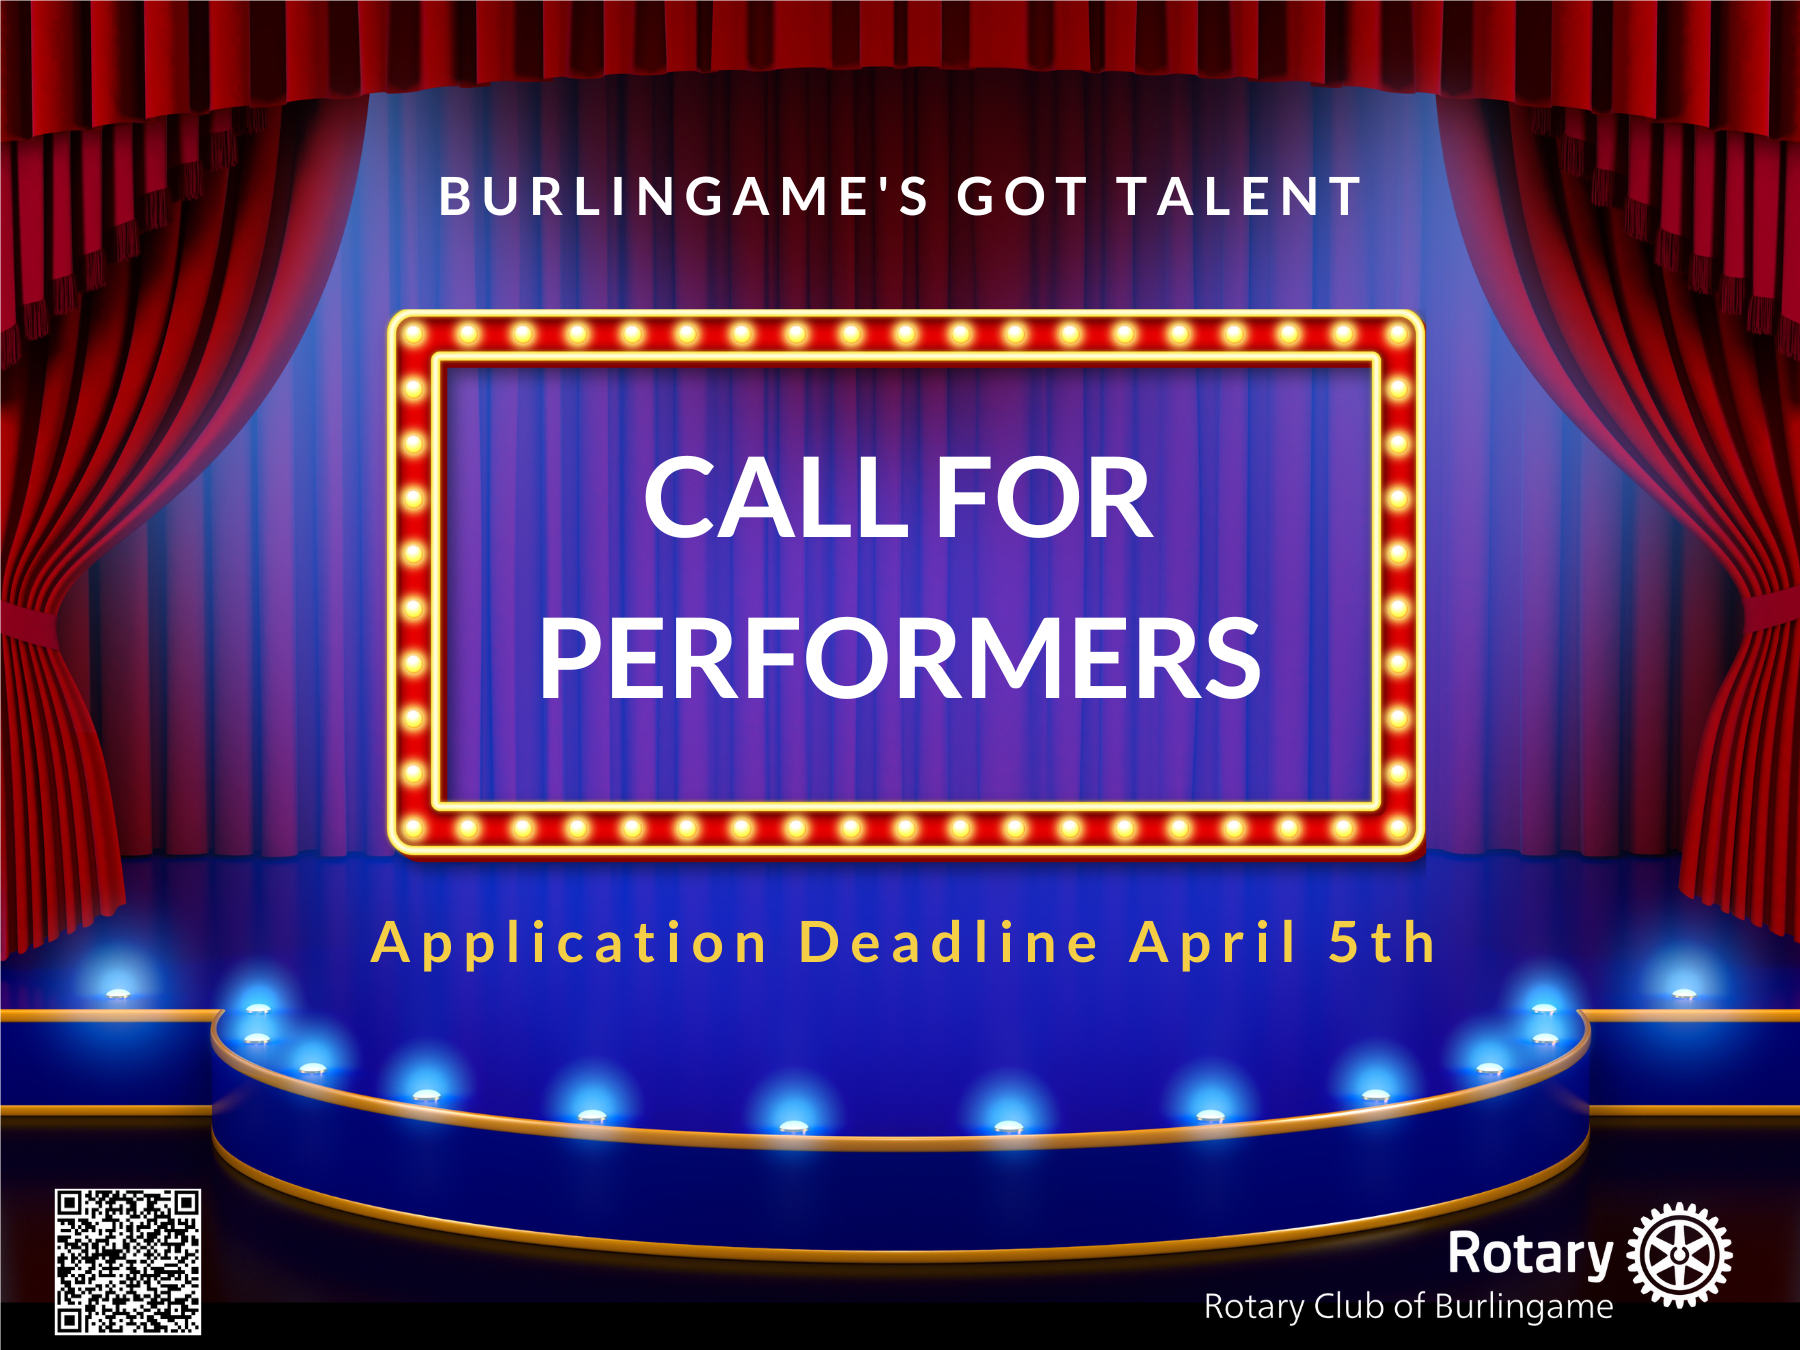 Call for Performers Deadline April 5